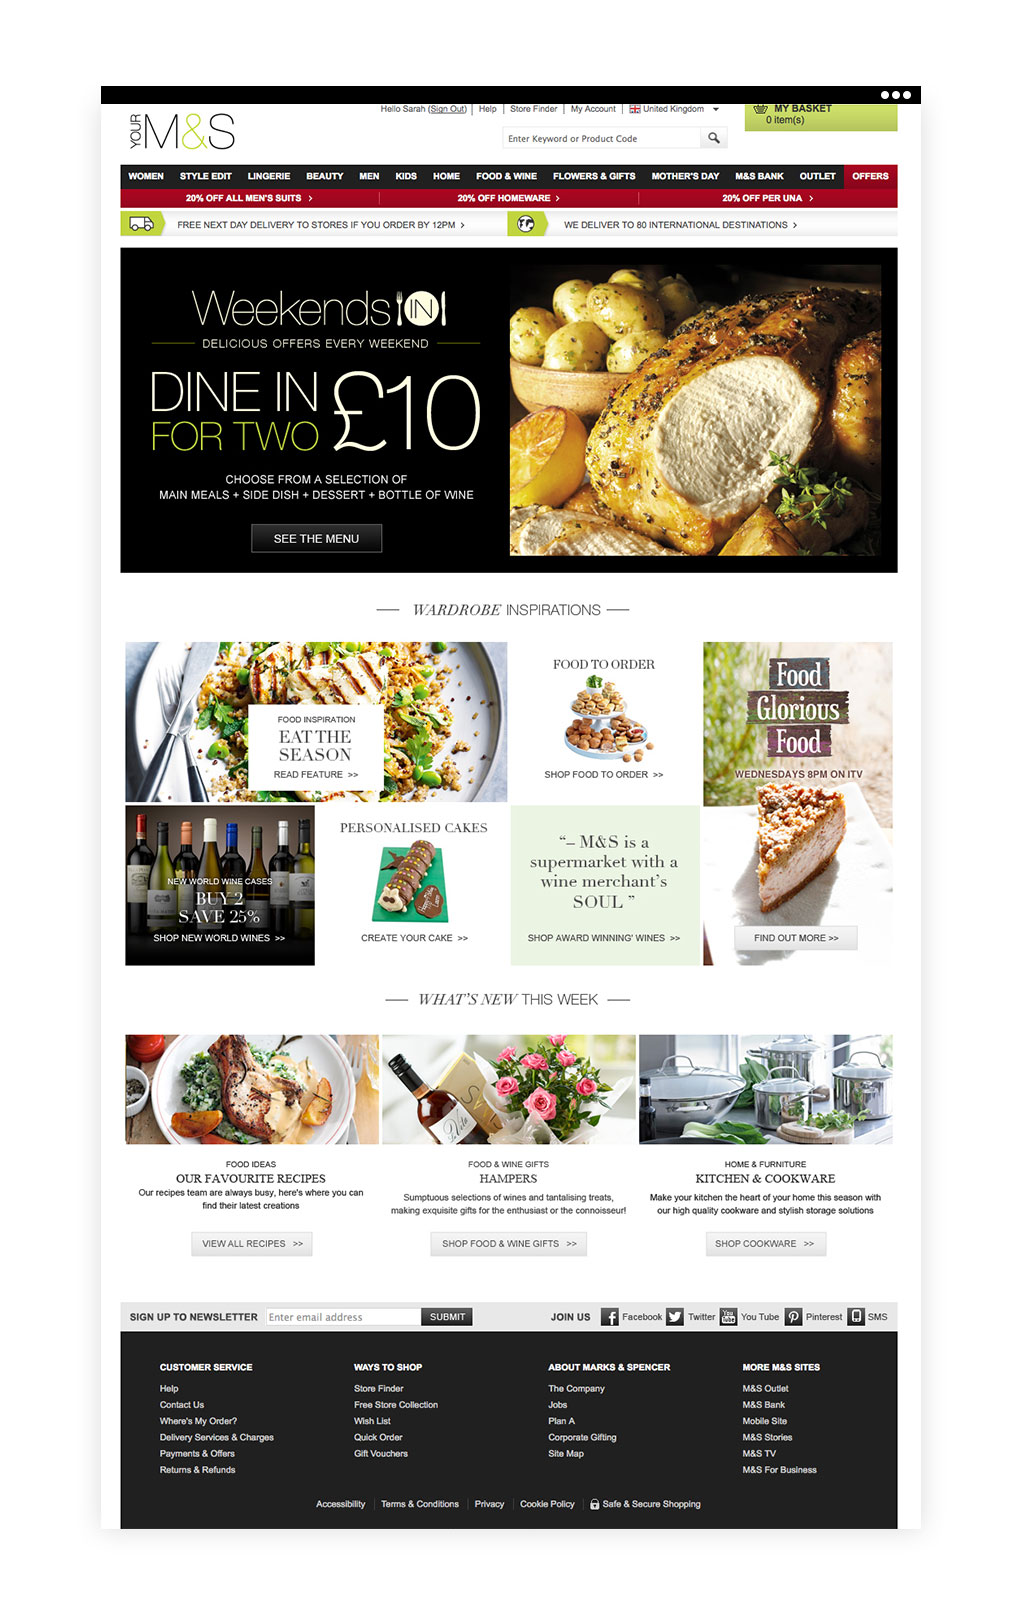 marks-and-spencer-homepage-concept